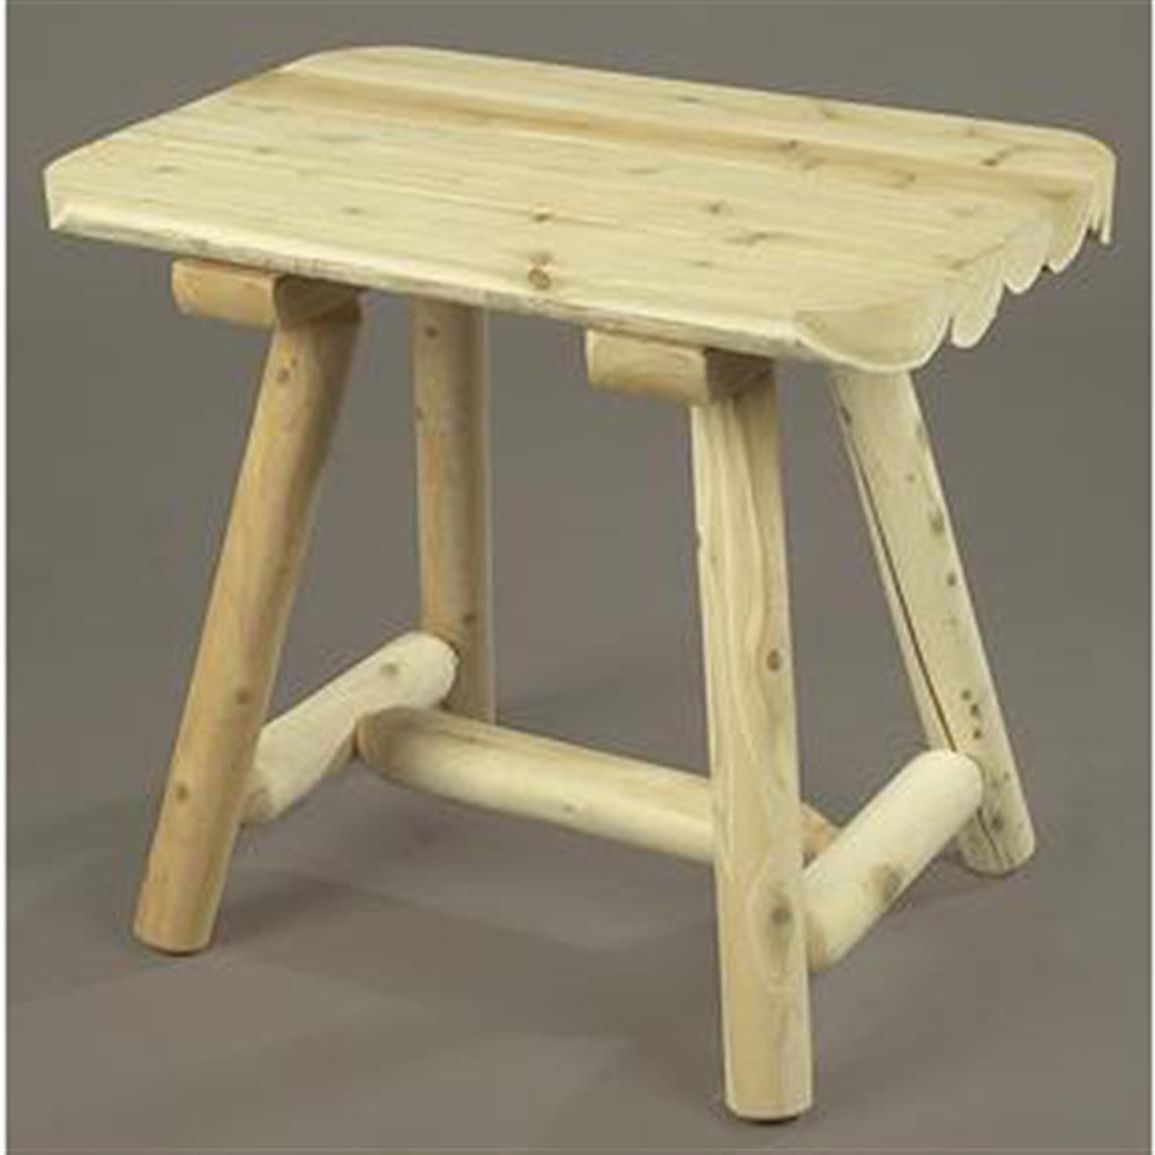 Rustic Natural Cedar Unfinished End Table – 200459, Patio Furniture At Within Latest Natural Wood Outdoor Side Tables (View 3 of 15)